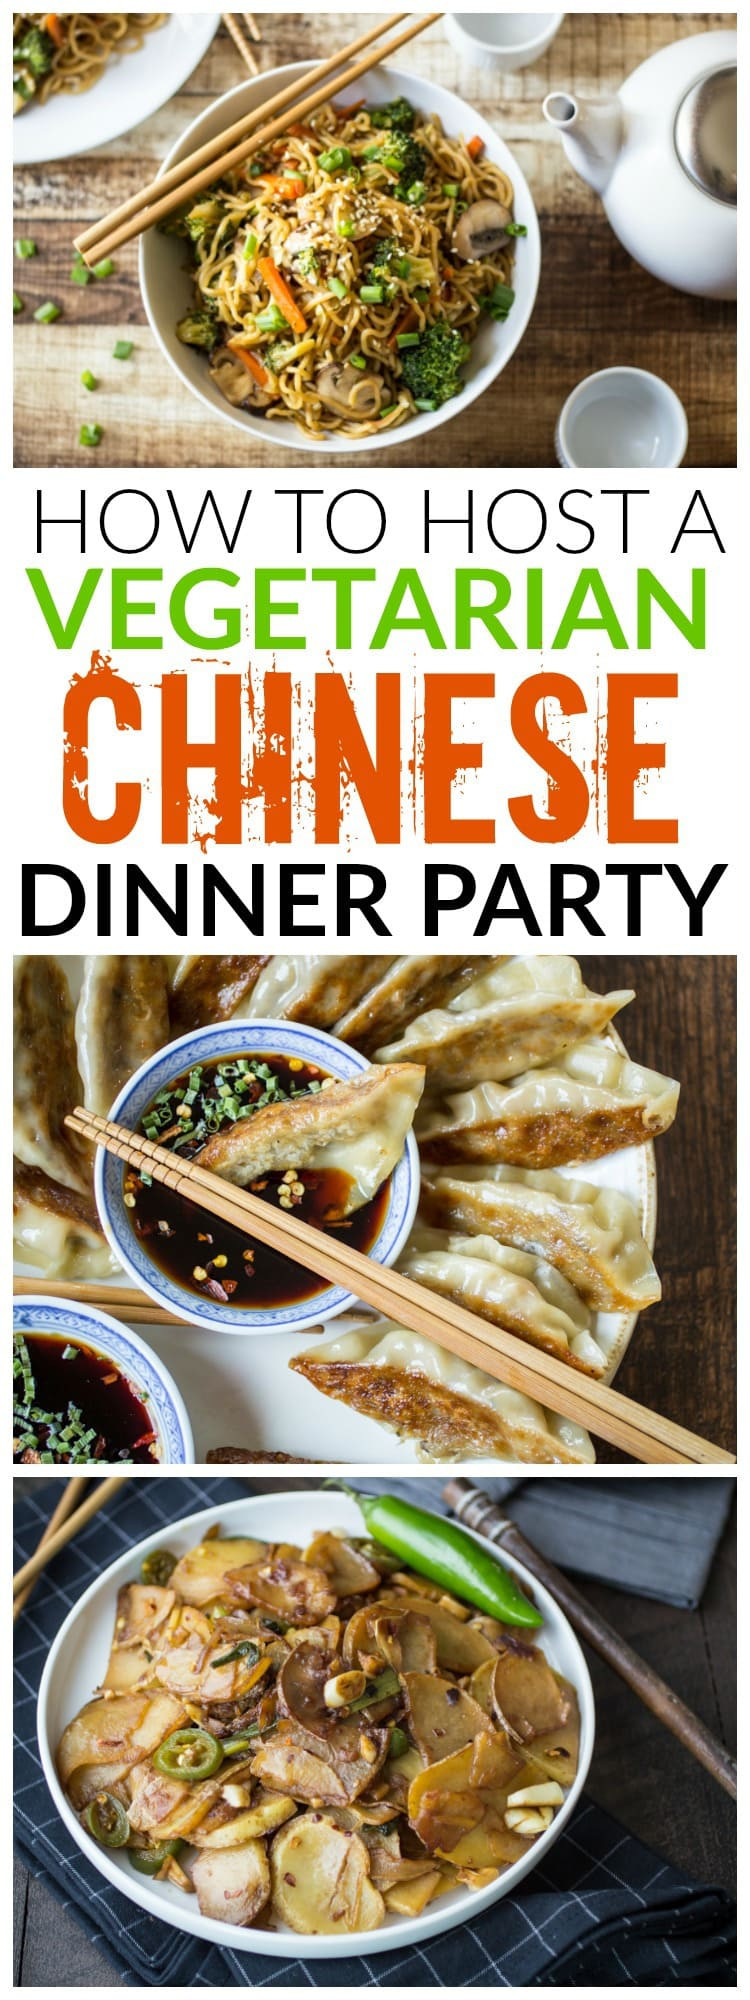 Dinner Party Recipes
 Ve arian Chinese Dinner Party Menu The Wanderlust Kitchen